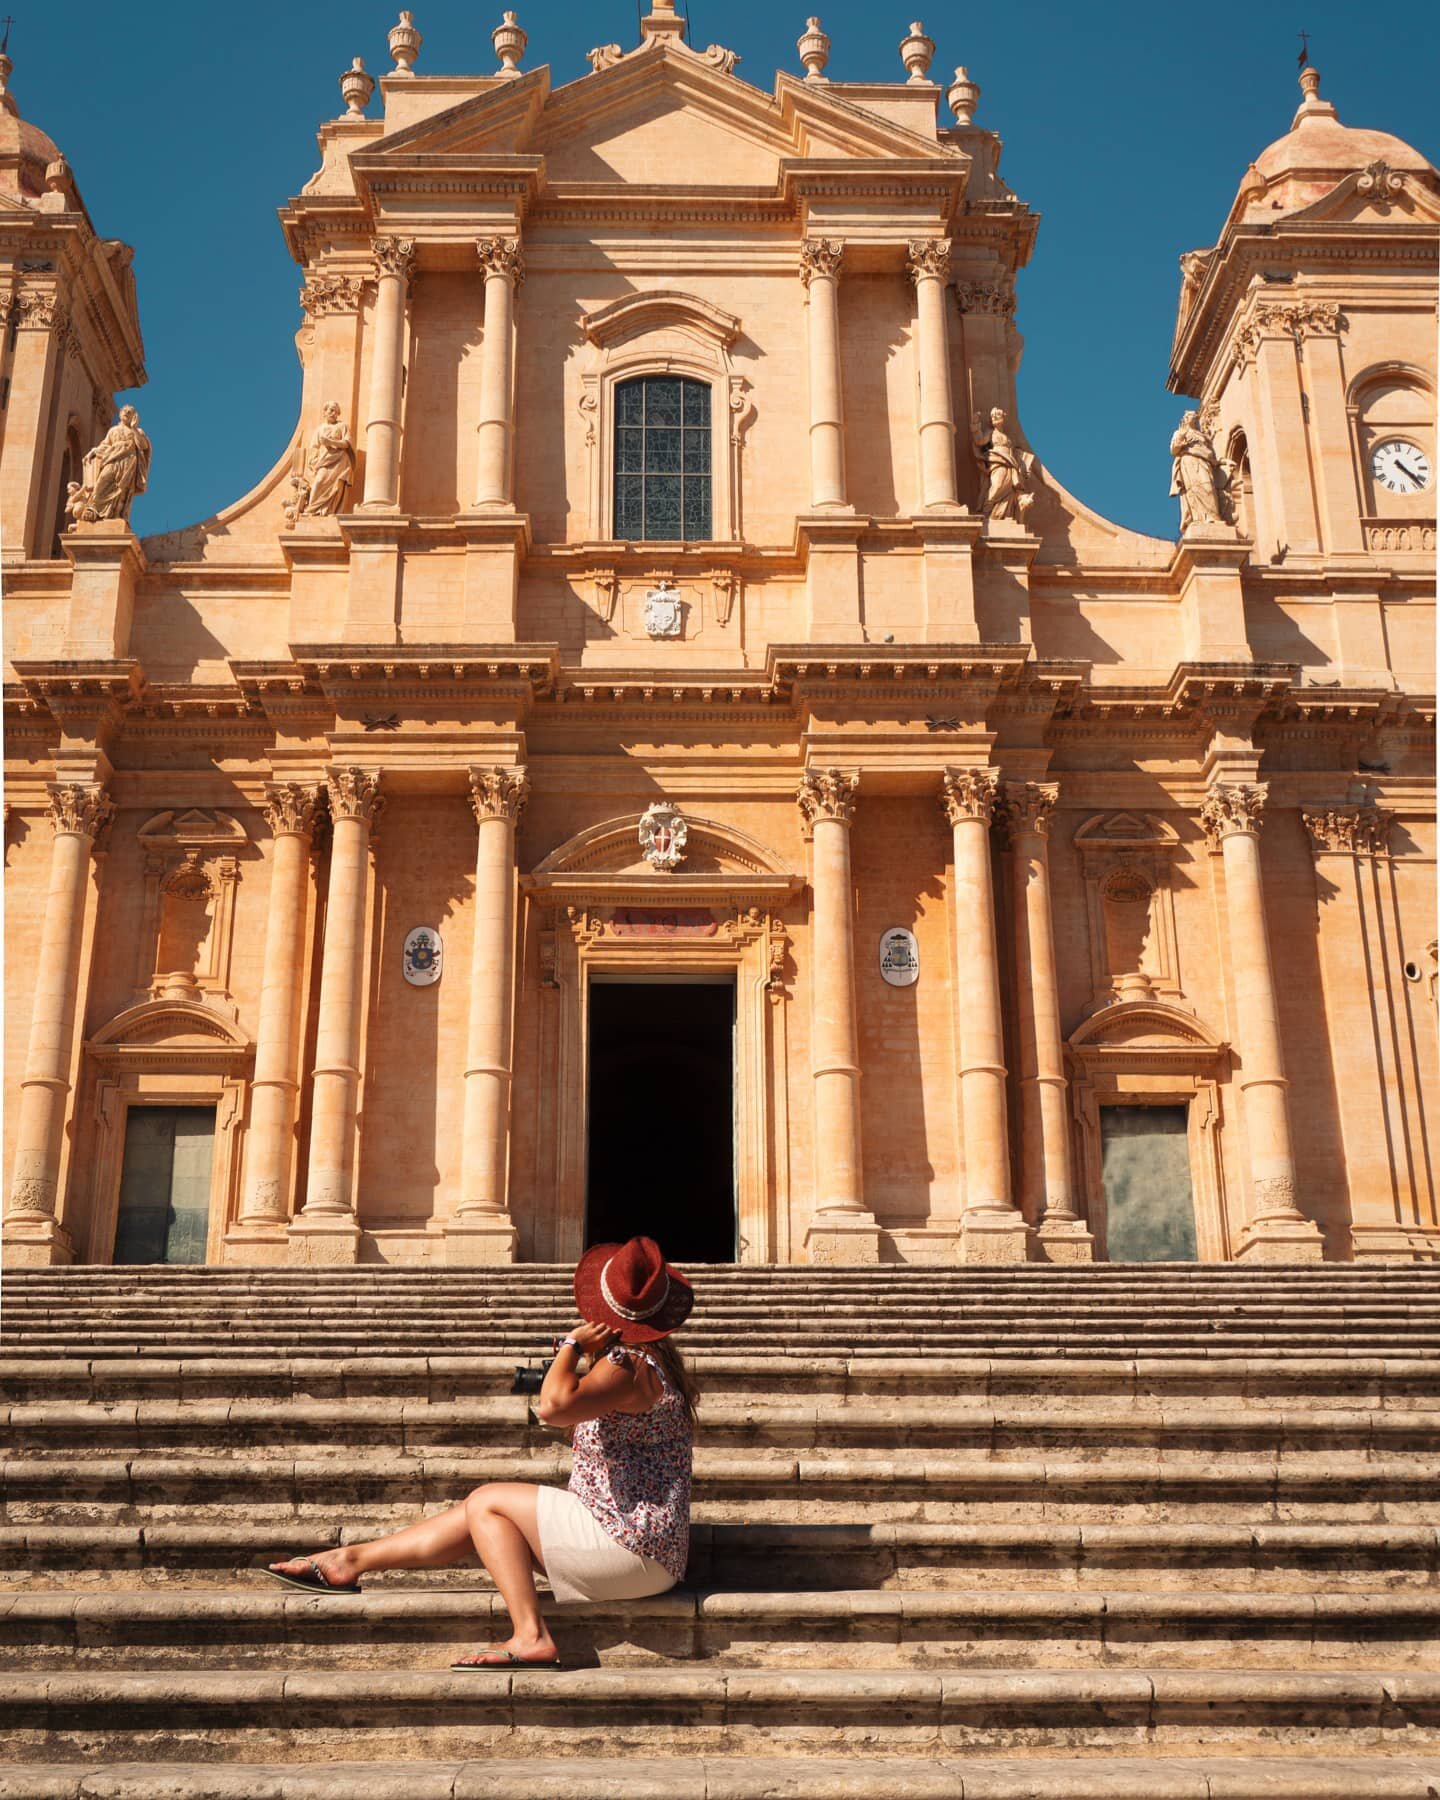 La bella Noto 🇮🇹
. 
🇬🇧 After a short break with thout posting here, I'm back with a pretty pic of Sicily 😍
.
Do not miss the impressive Cathedral of Noto, one of the prettiest baroque cities of the island. 
. 
I wrote a complete guide on my blog